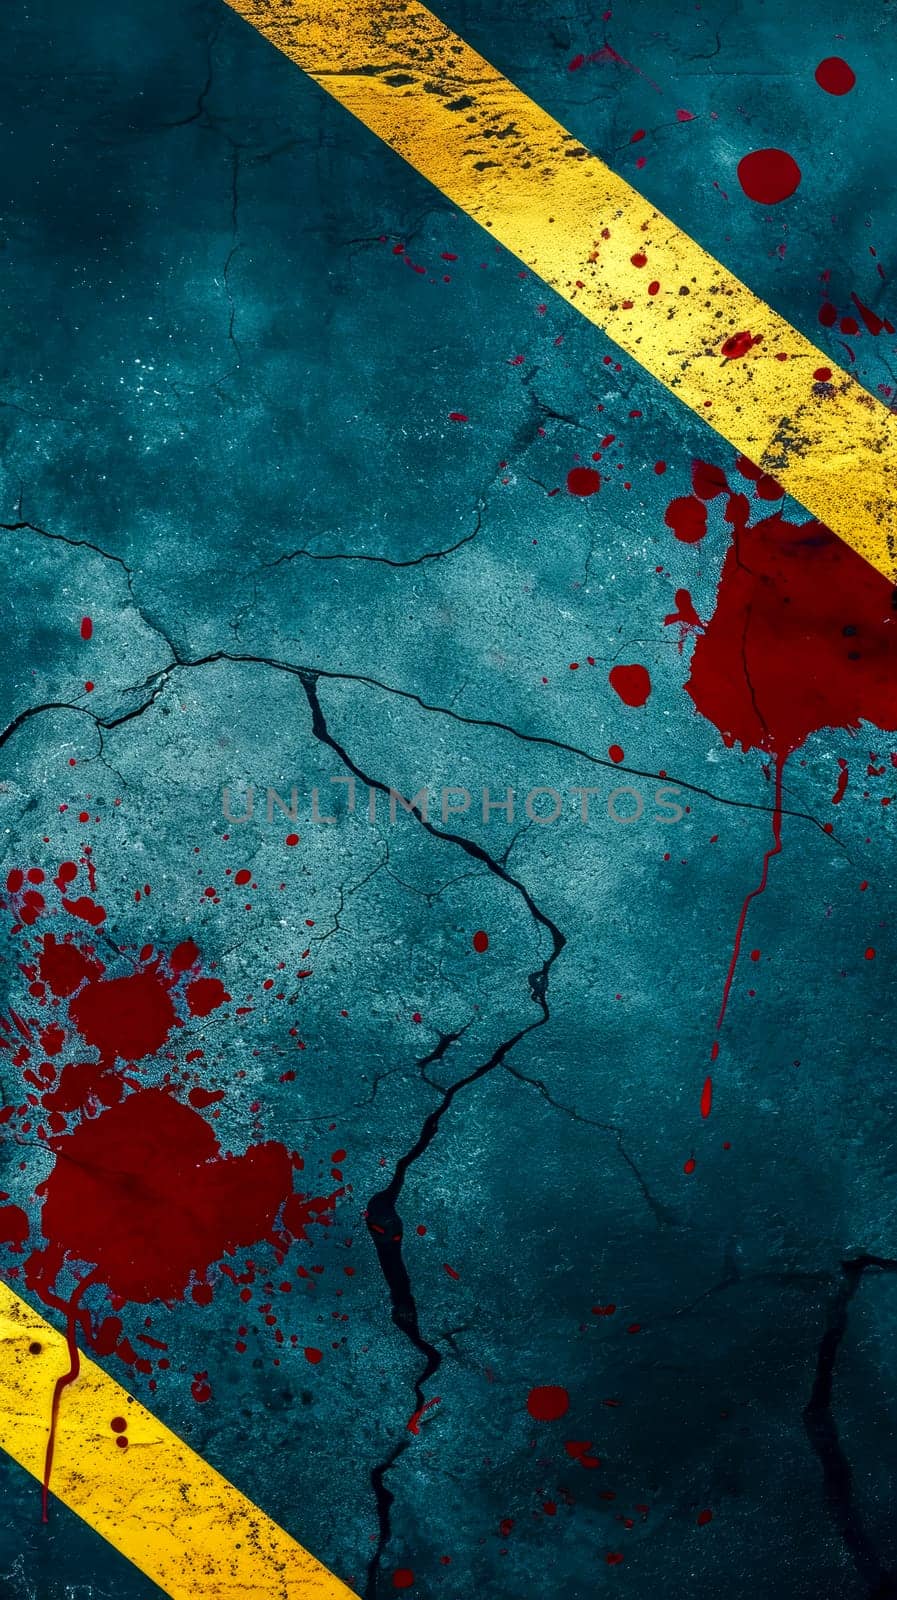 gritty, dark blue textured background with a diagonal yellow hazard stripe and splatters of red that could be interpreted as blood, crime scene or something ominous, with ample space for copy or text.